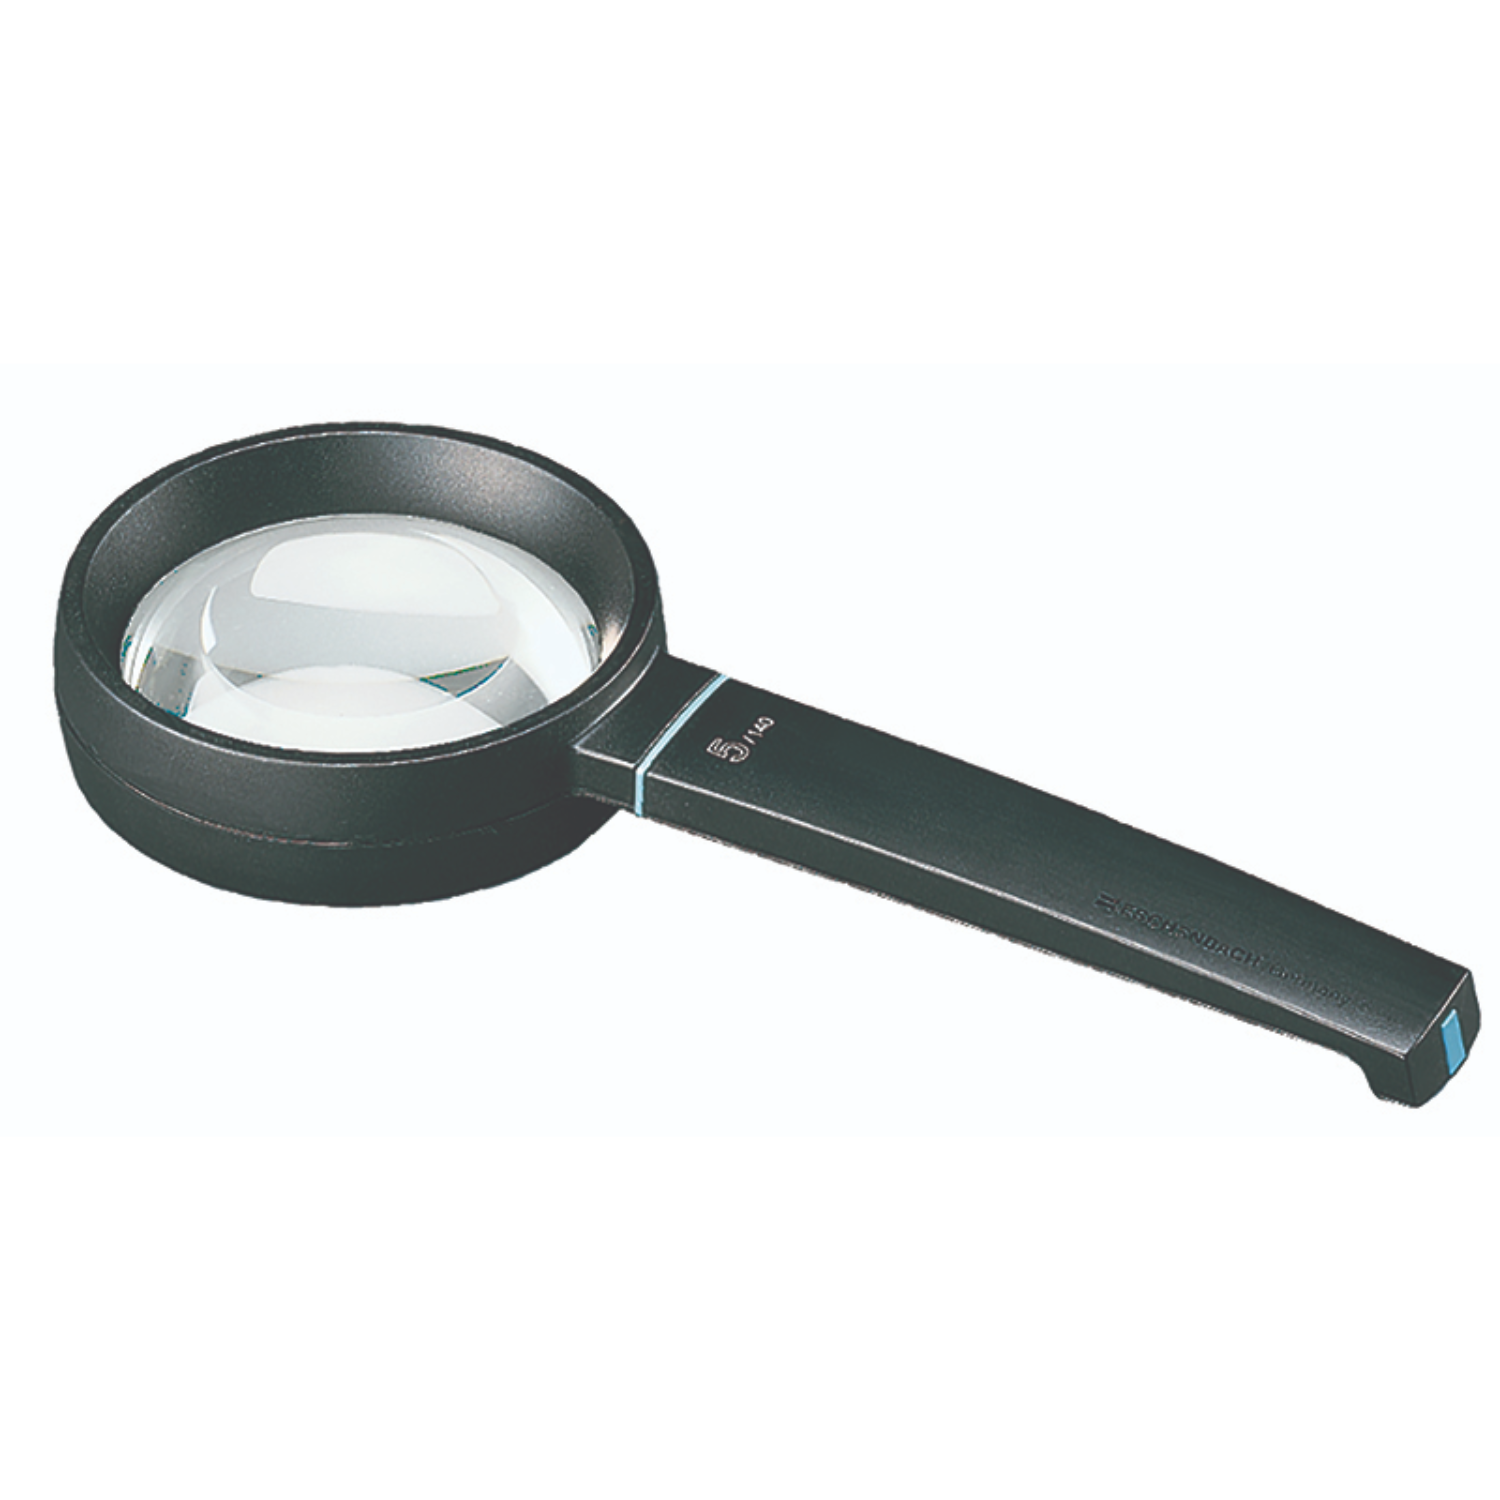 Image of the 5x Round Aspheric II Hand-held Magnifier from Eschenbach.